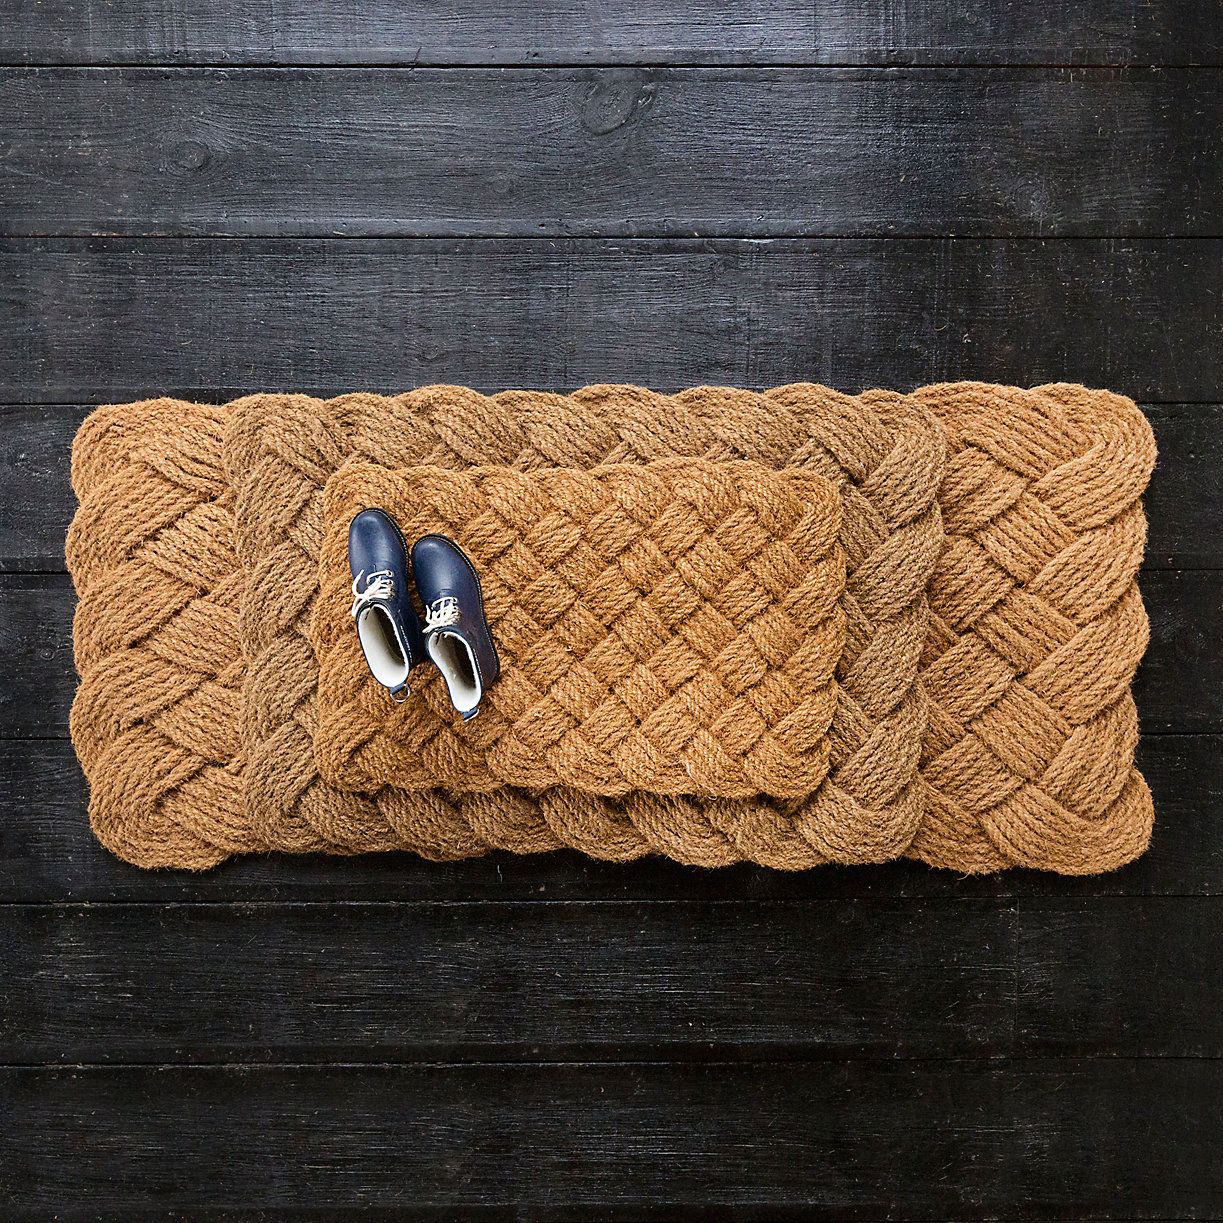 The best doormats, according to experts - The Washington Post